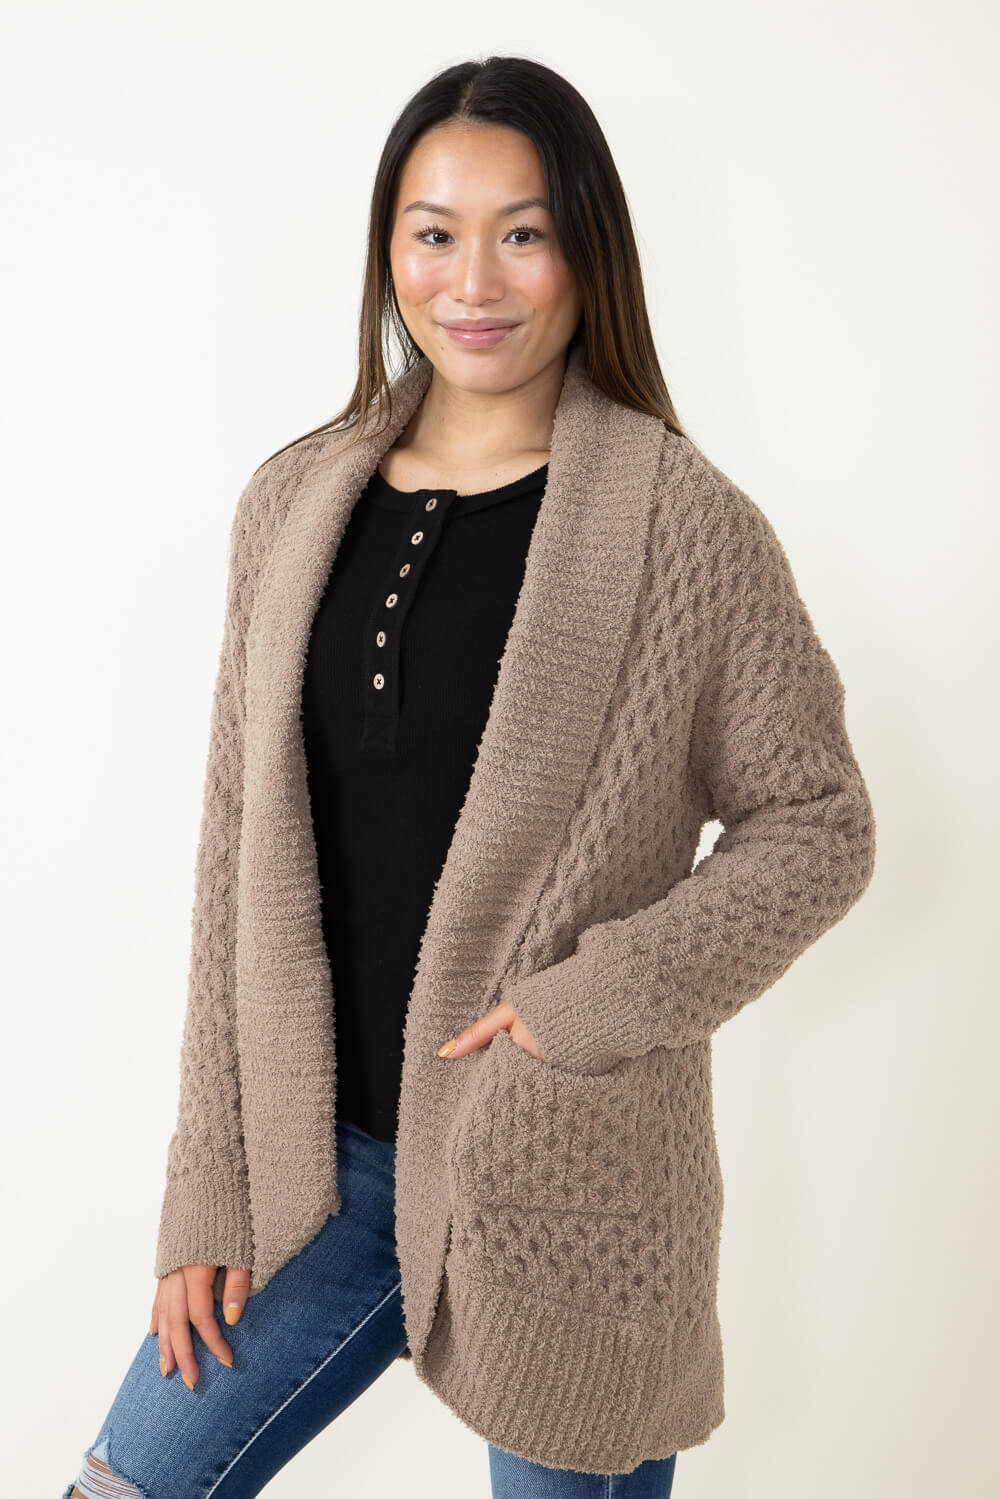 Comfy Textured Knit Sweater Cardigan for Women in Brown